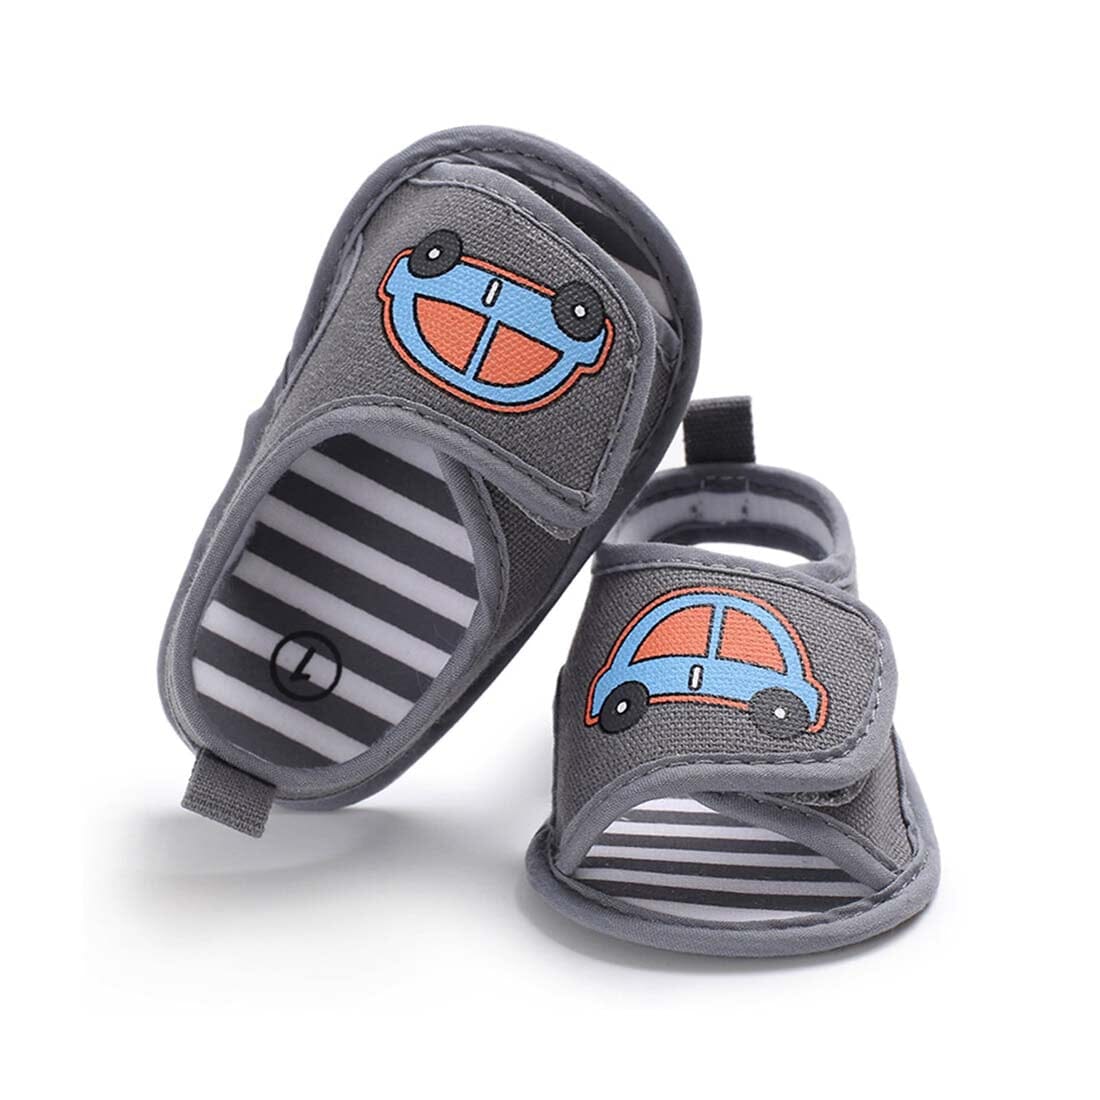 Baby Boys Soft Sole Sandals Shoes Iluvlittlepeople 6-9Month Grey Rubber